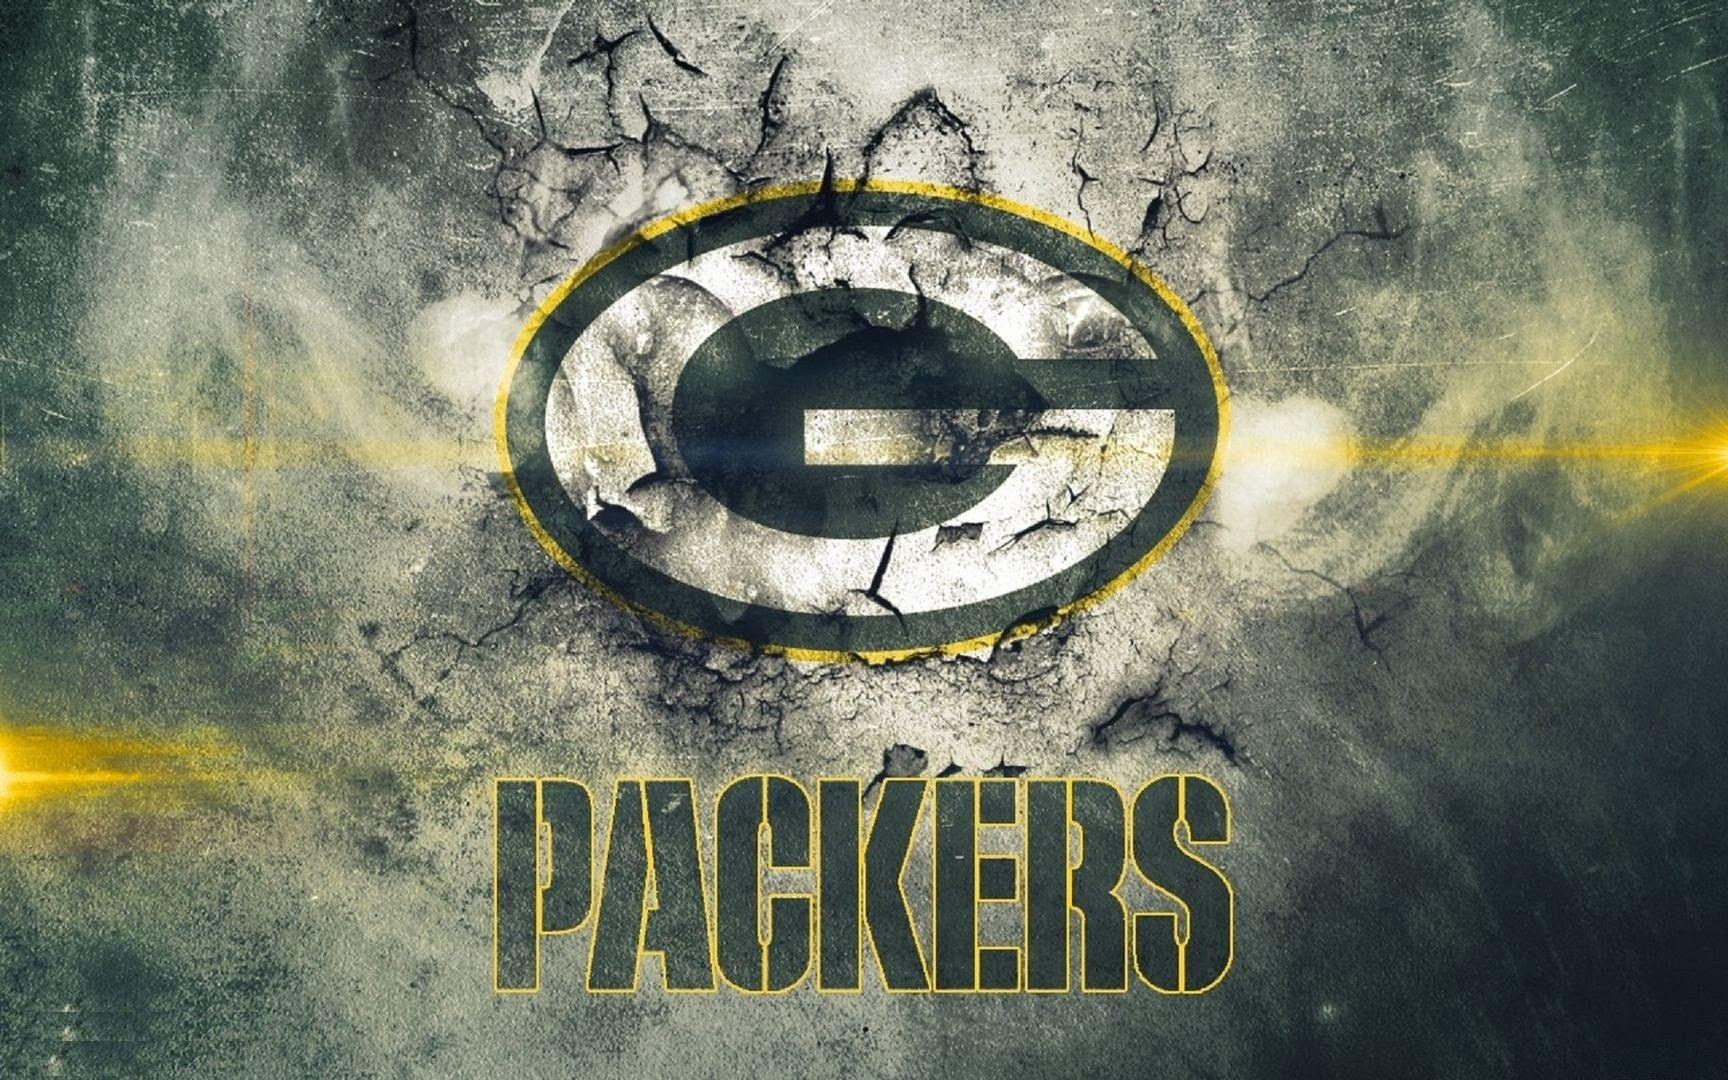 Green Bay Packers Wallpapers HD 2018